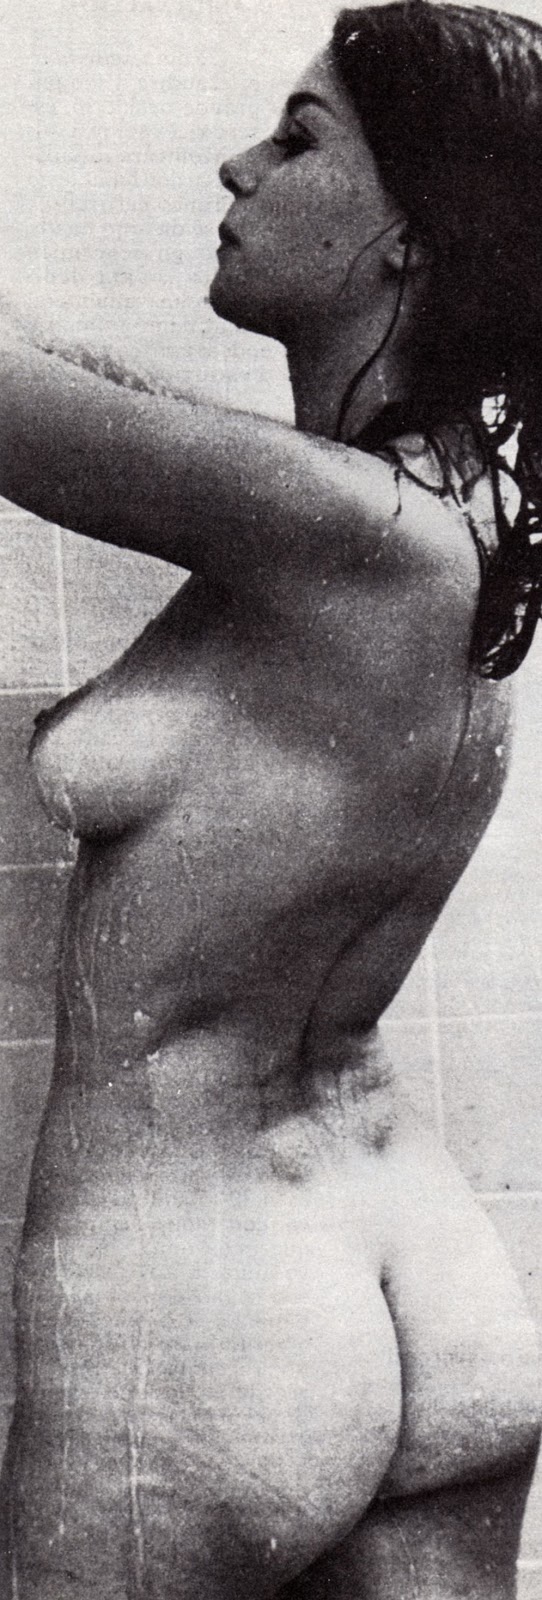 Natalie wood nude pictures